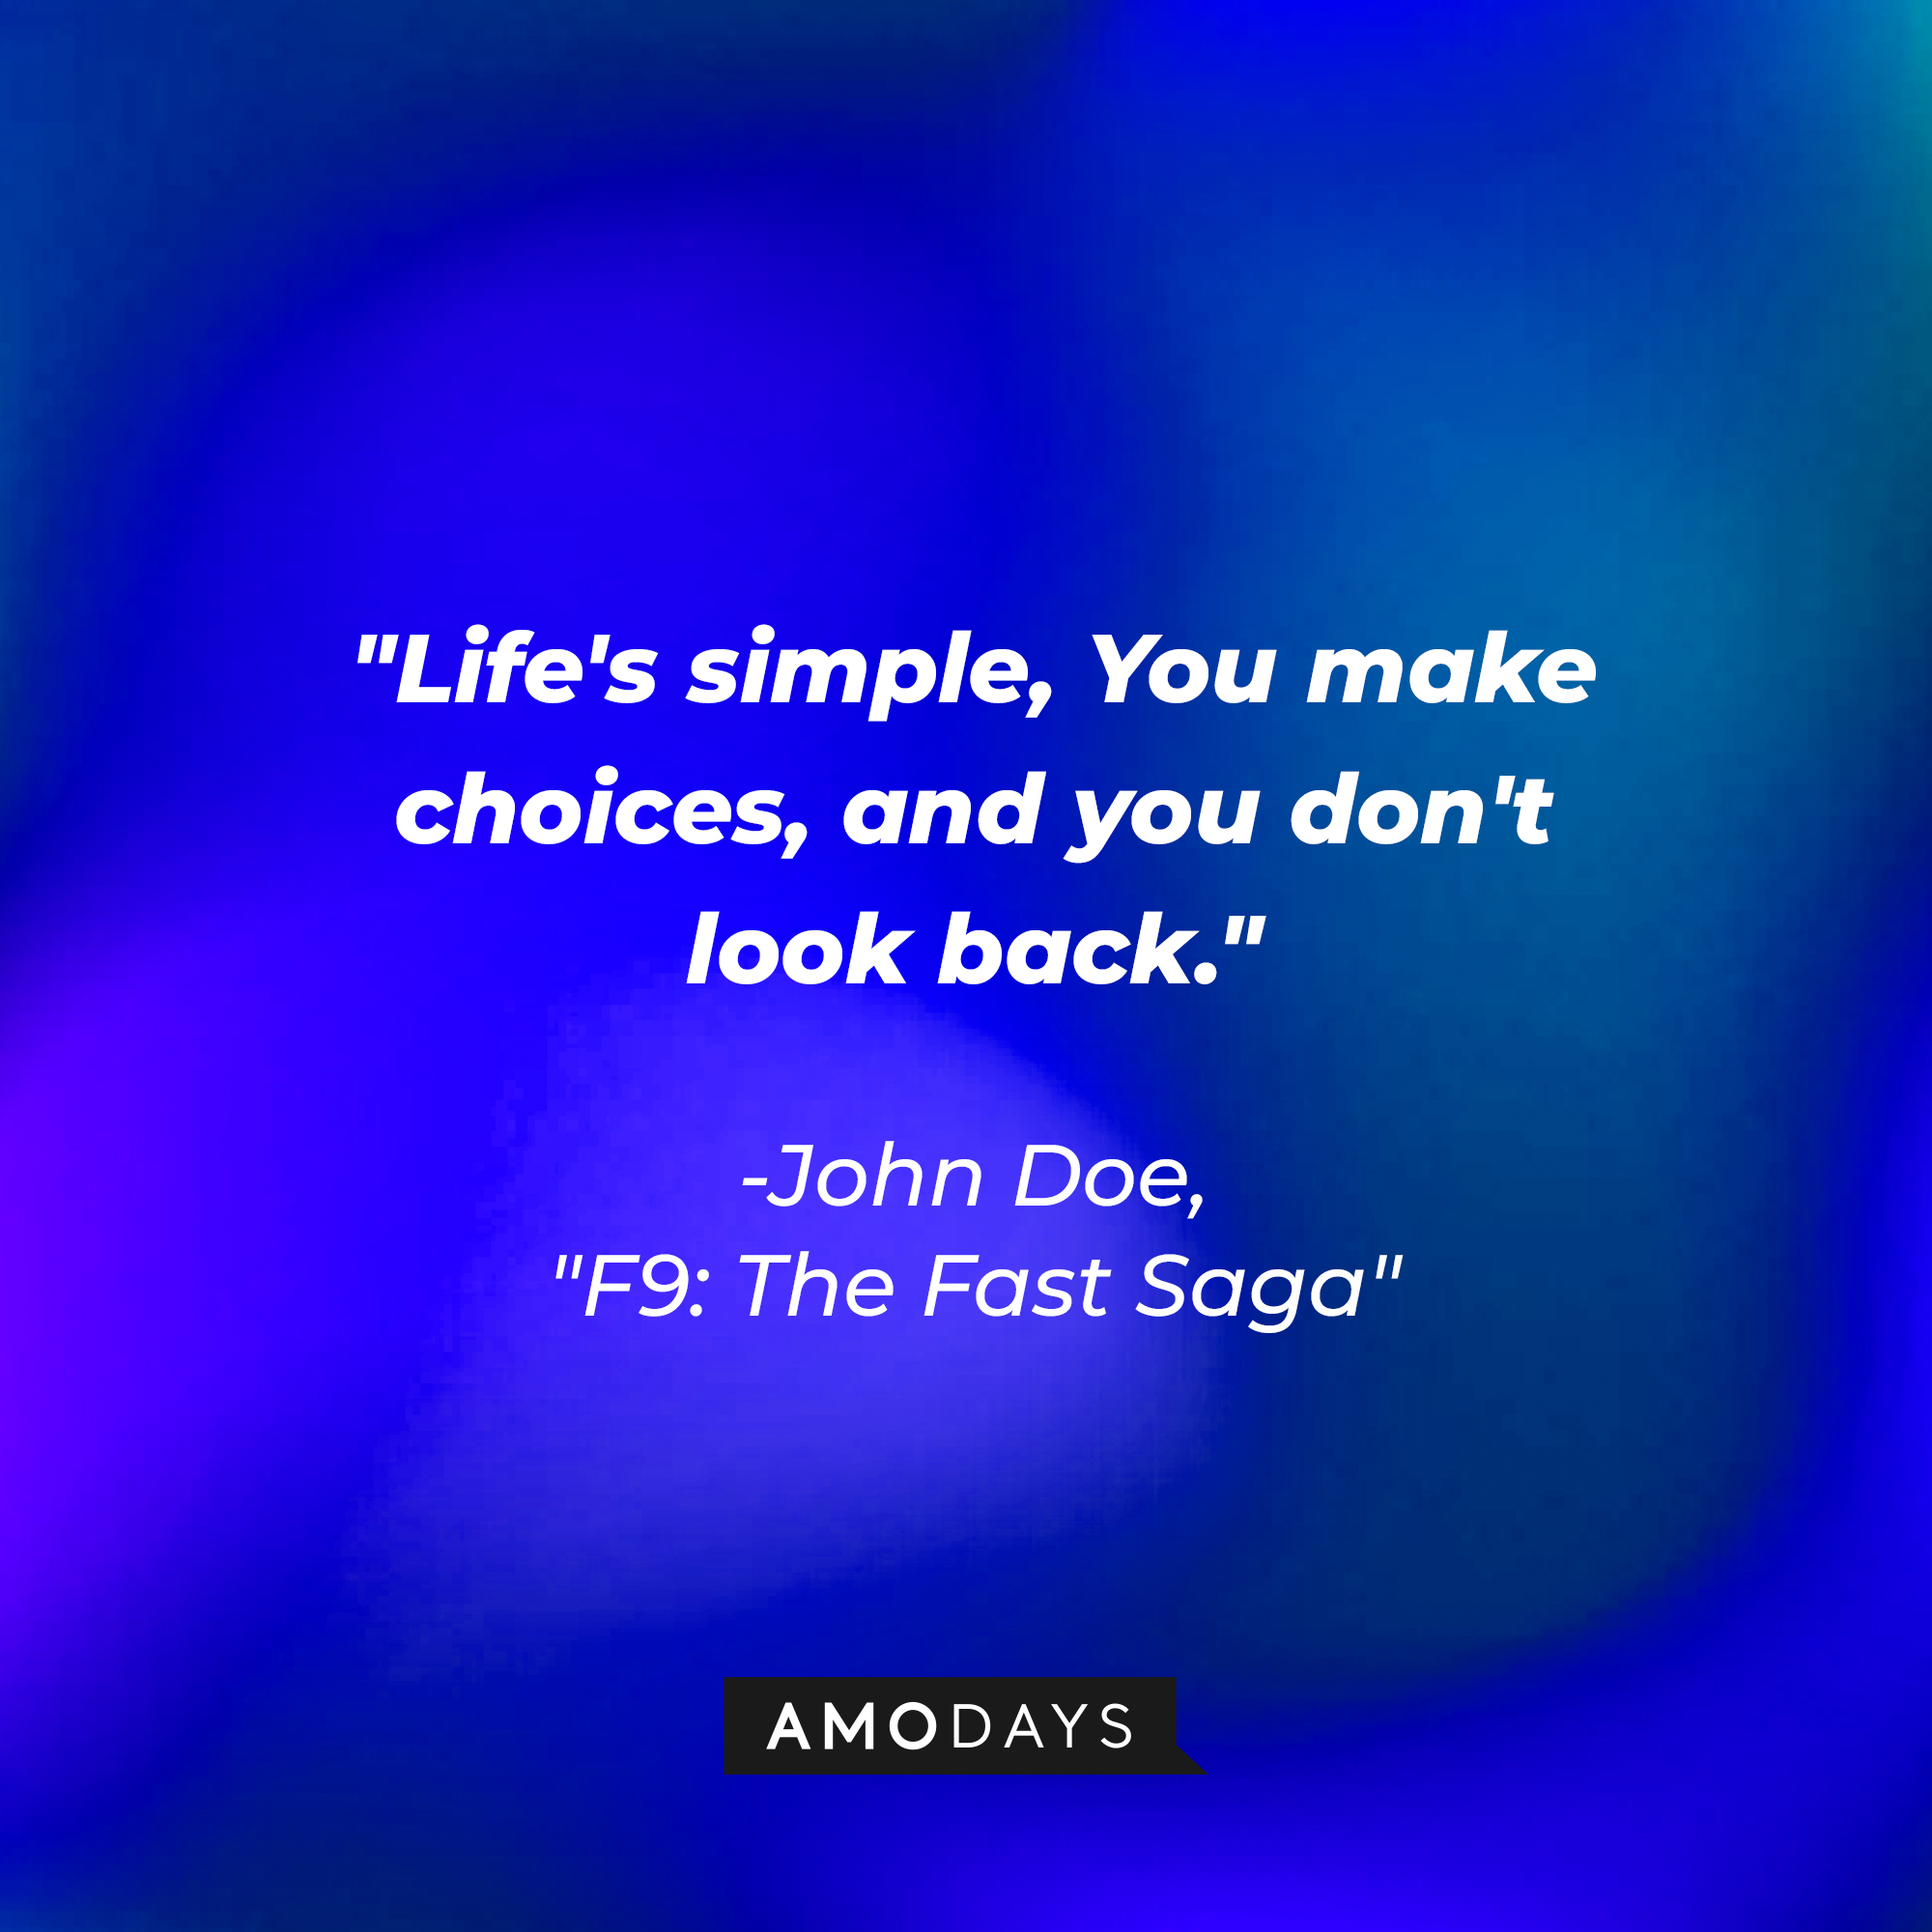 John Doe’s quote "Life's simple, You make choices, and you don't look back." | Image: AmoDays